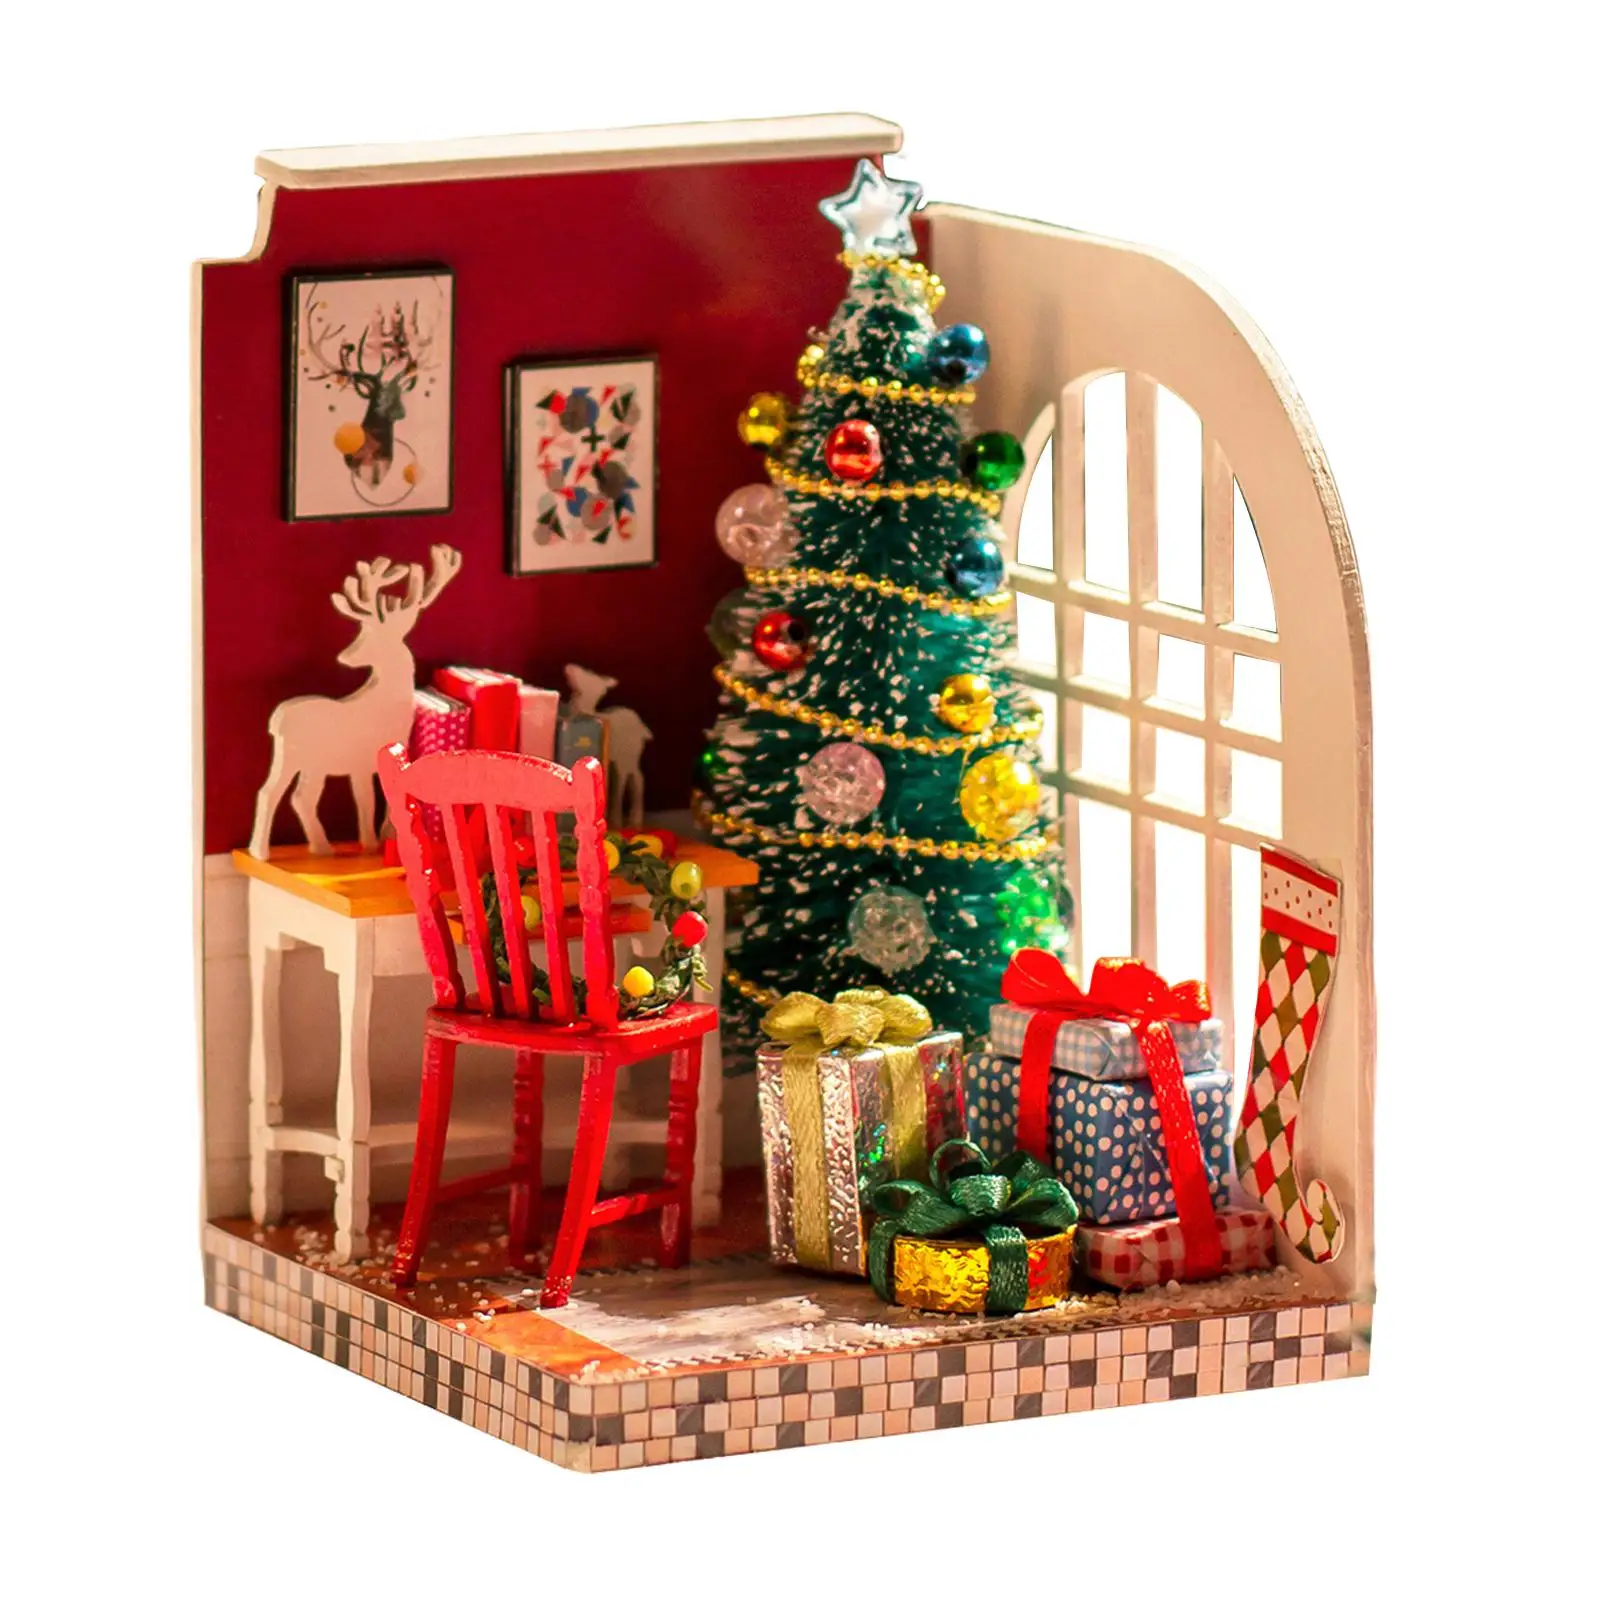 Wood DIY Miniature Dollhouse Kit 3D Puzzle for Girls Boys Creative Gifts